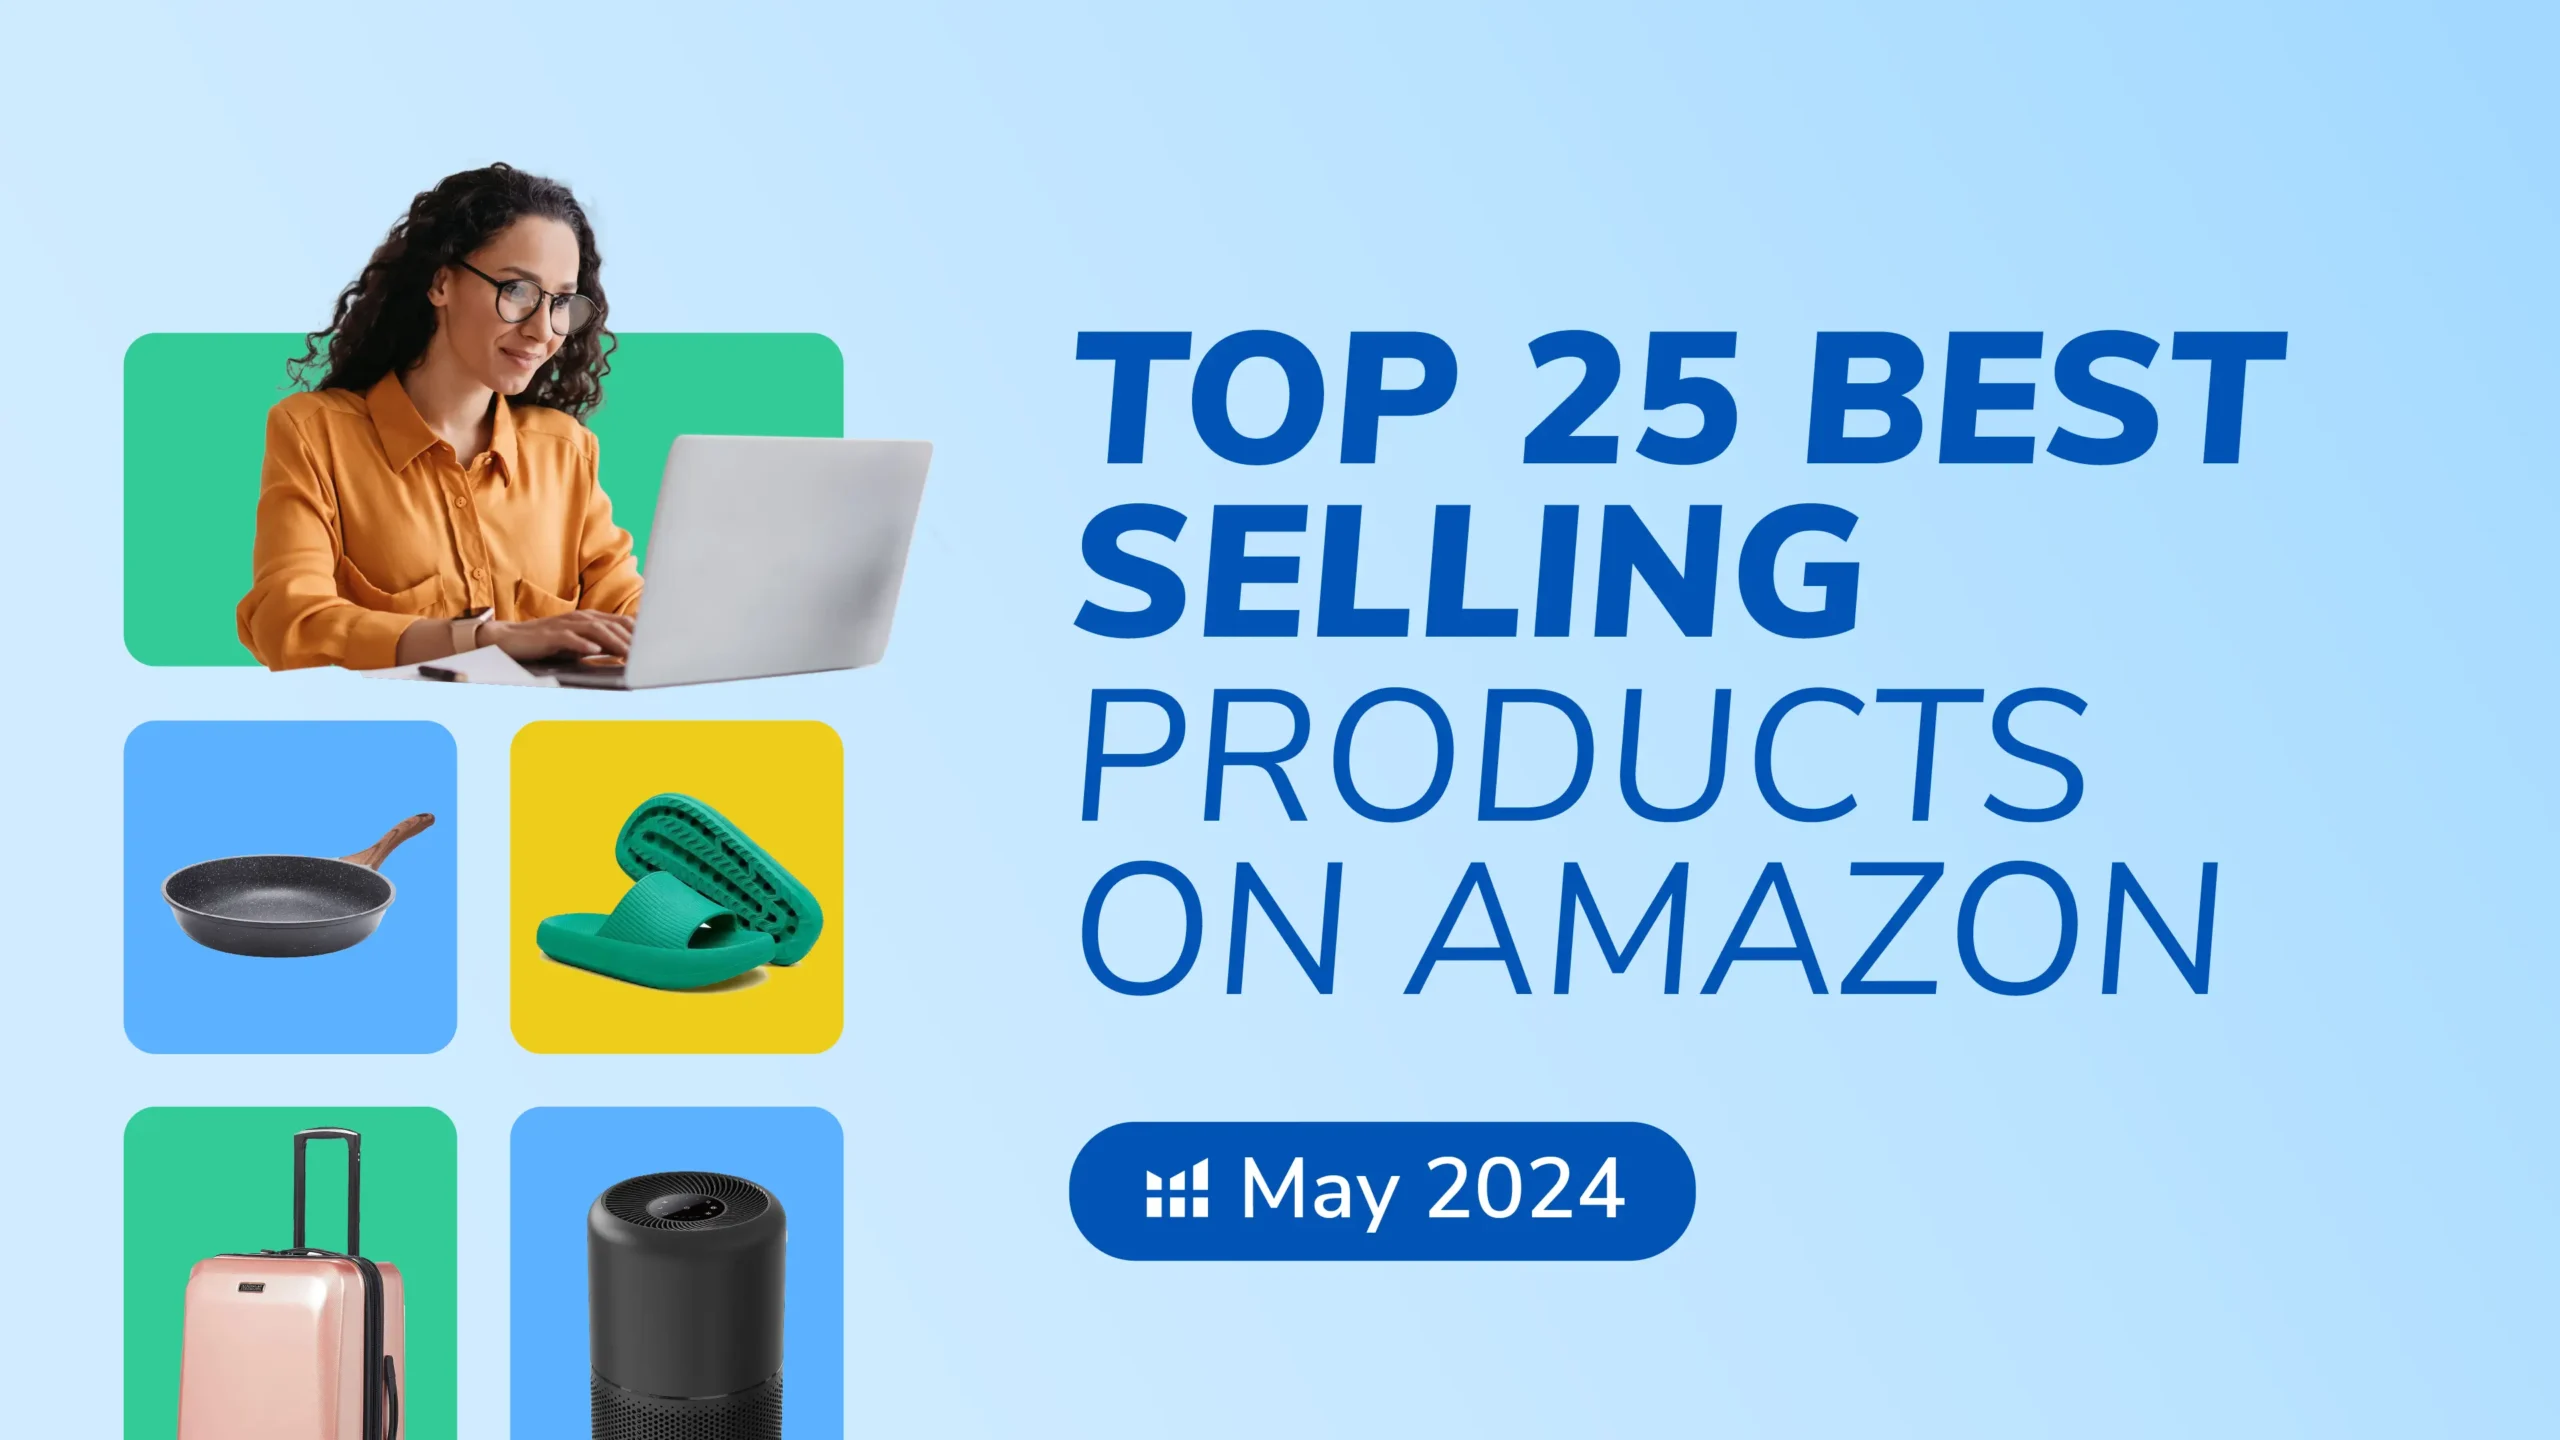 Top 25 Best Selling Products on Amazon in May 2024